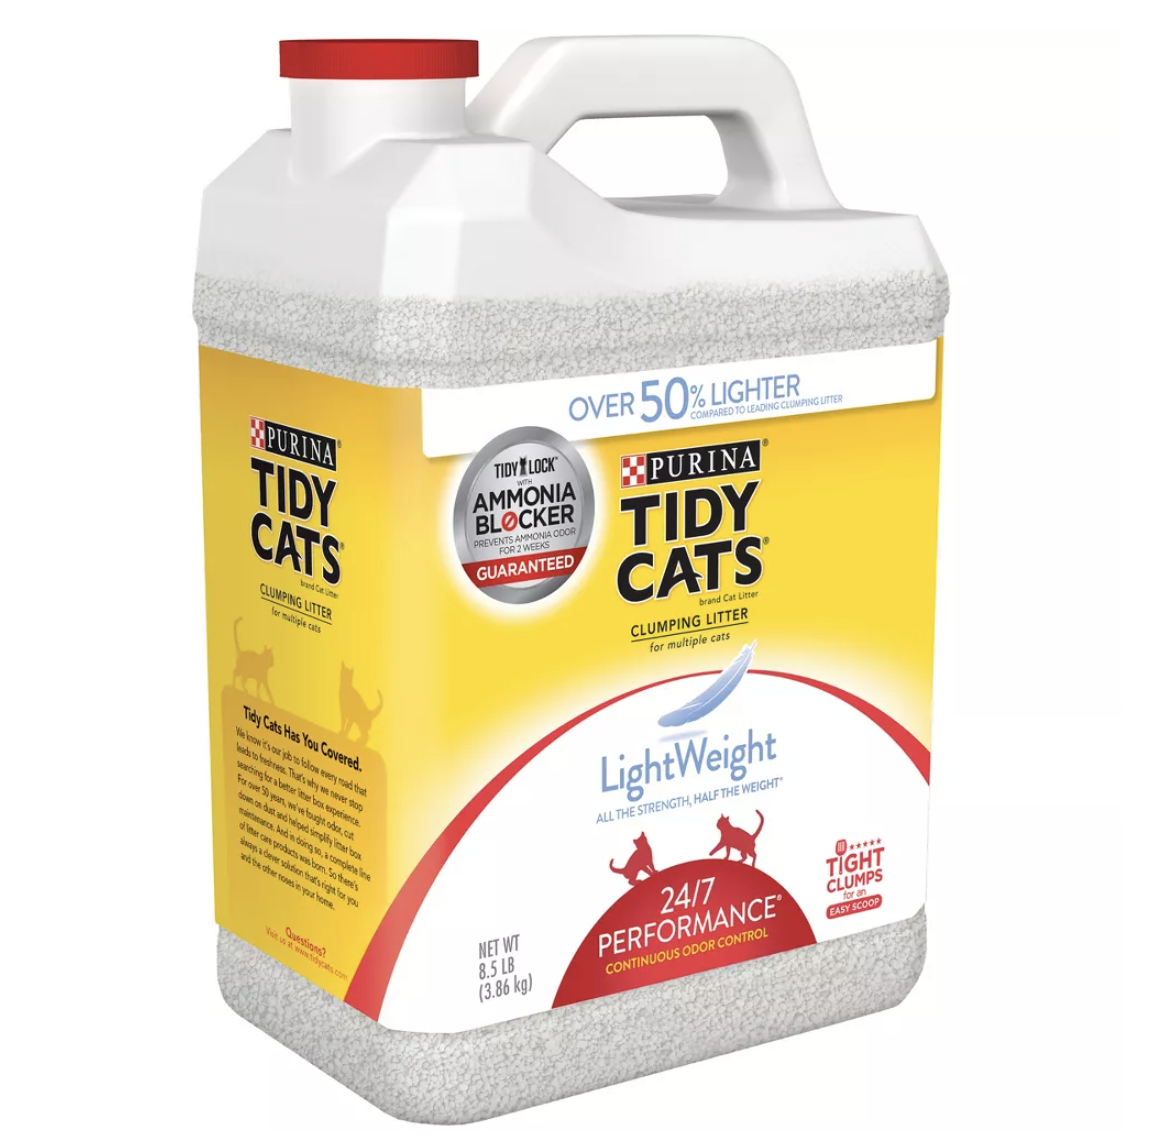 A box of Tidy Cats Light Weight 24/7 Performance Multiple Cat Kitty Litter